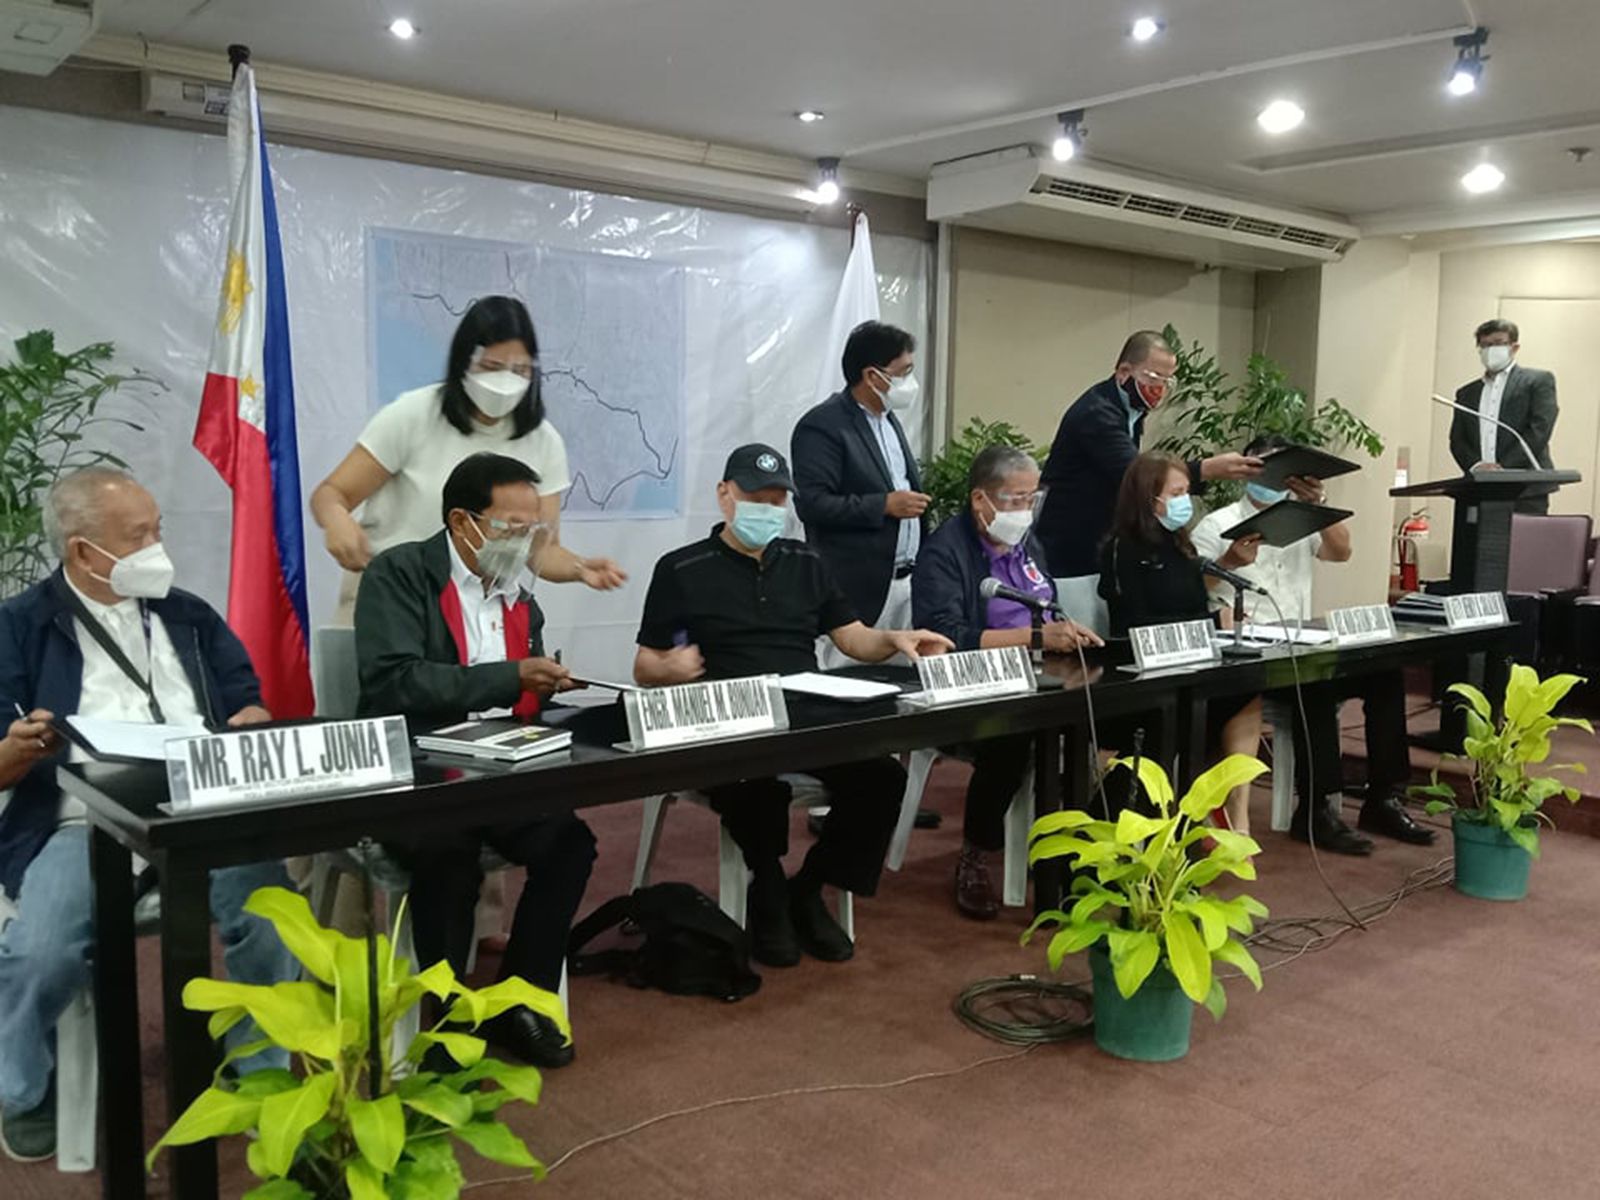 Signing of the pasig river expressway Special Toll Operations Agreement (STOA) photo OpinYon